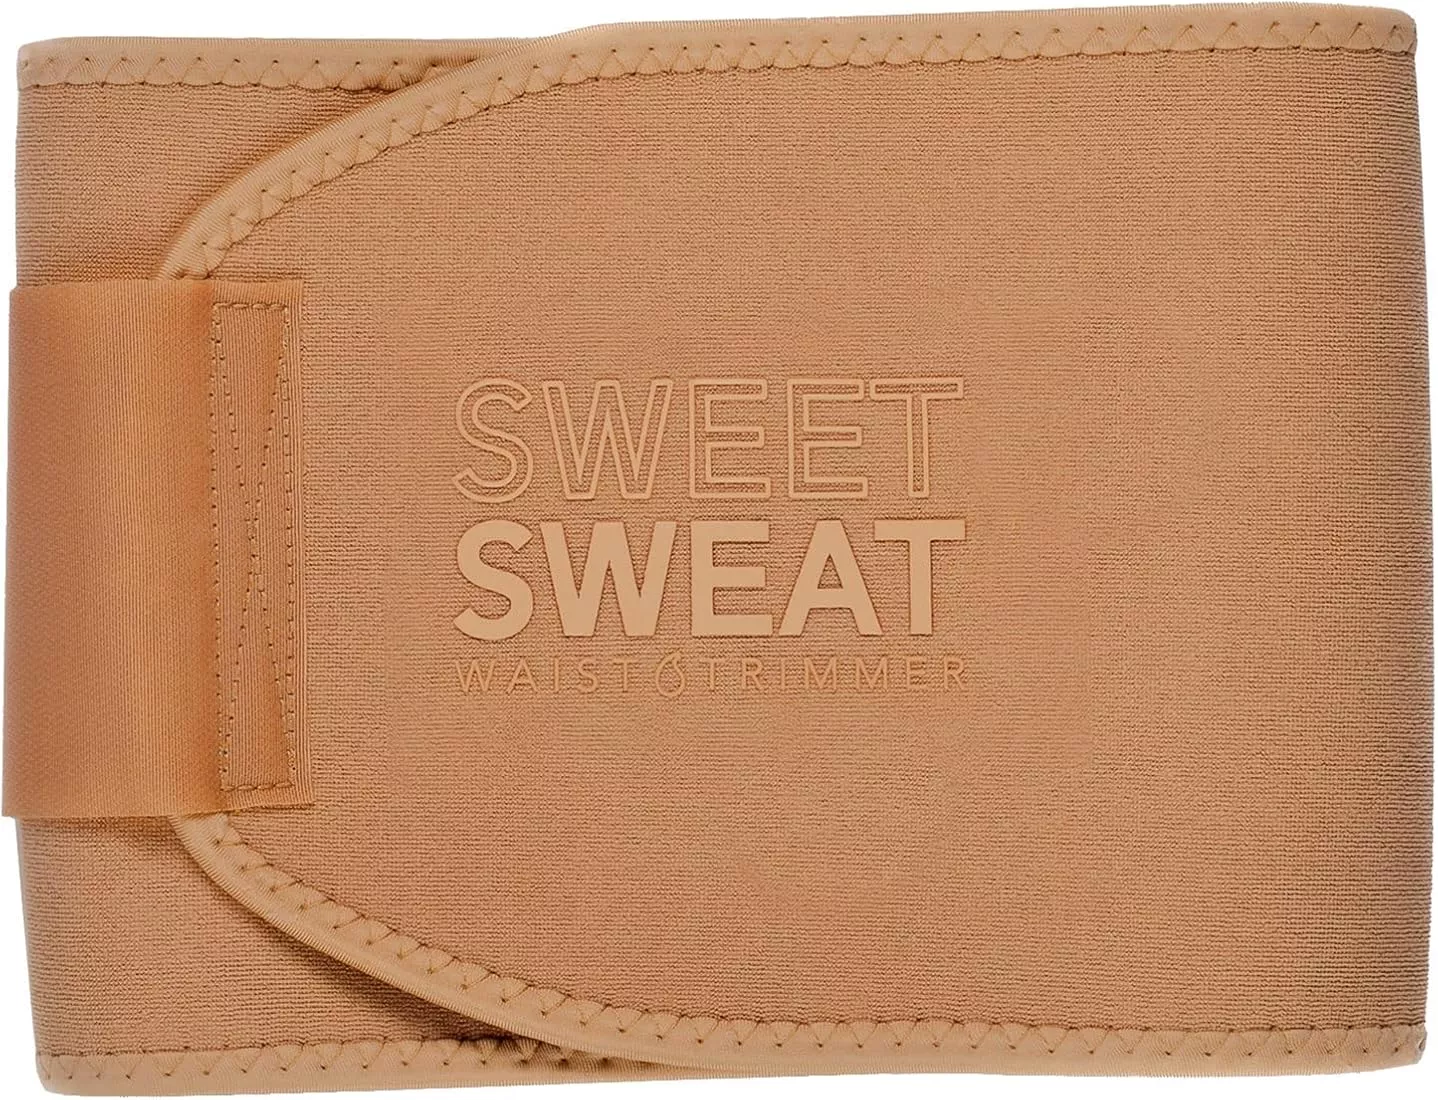 About Us  Sweet Sweat